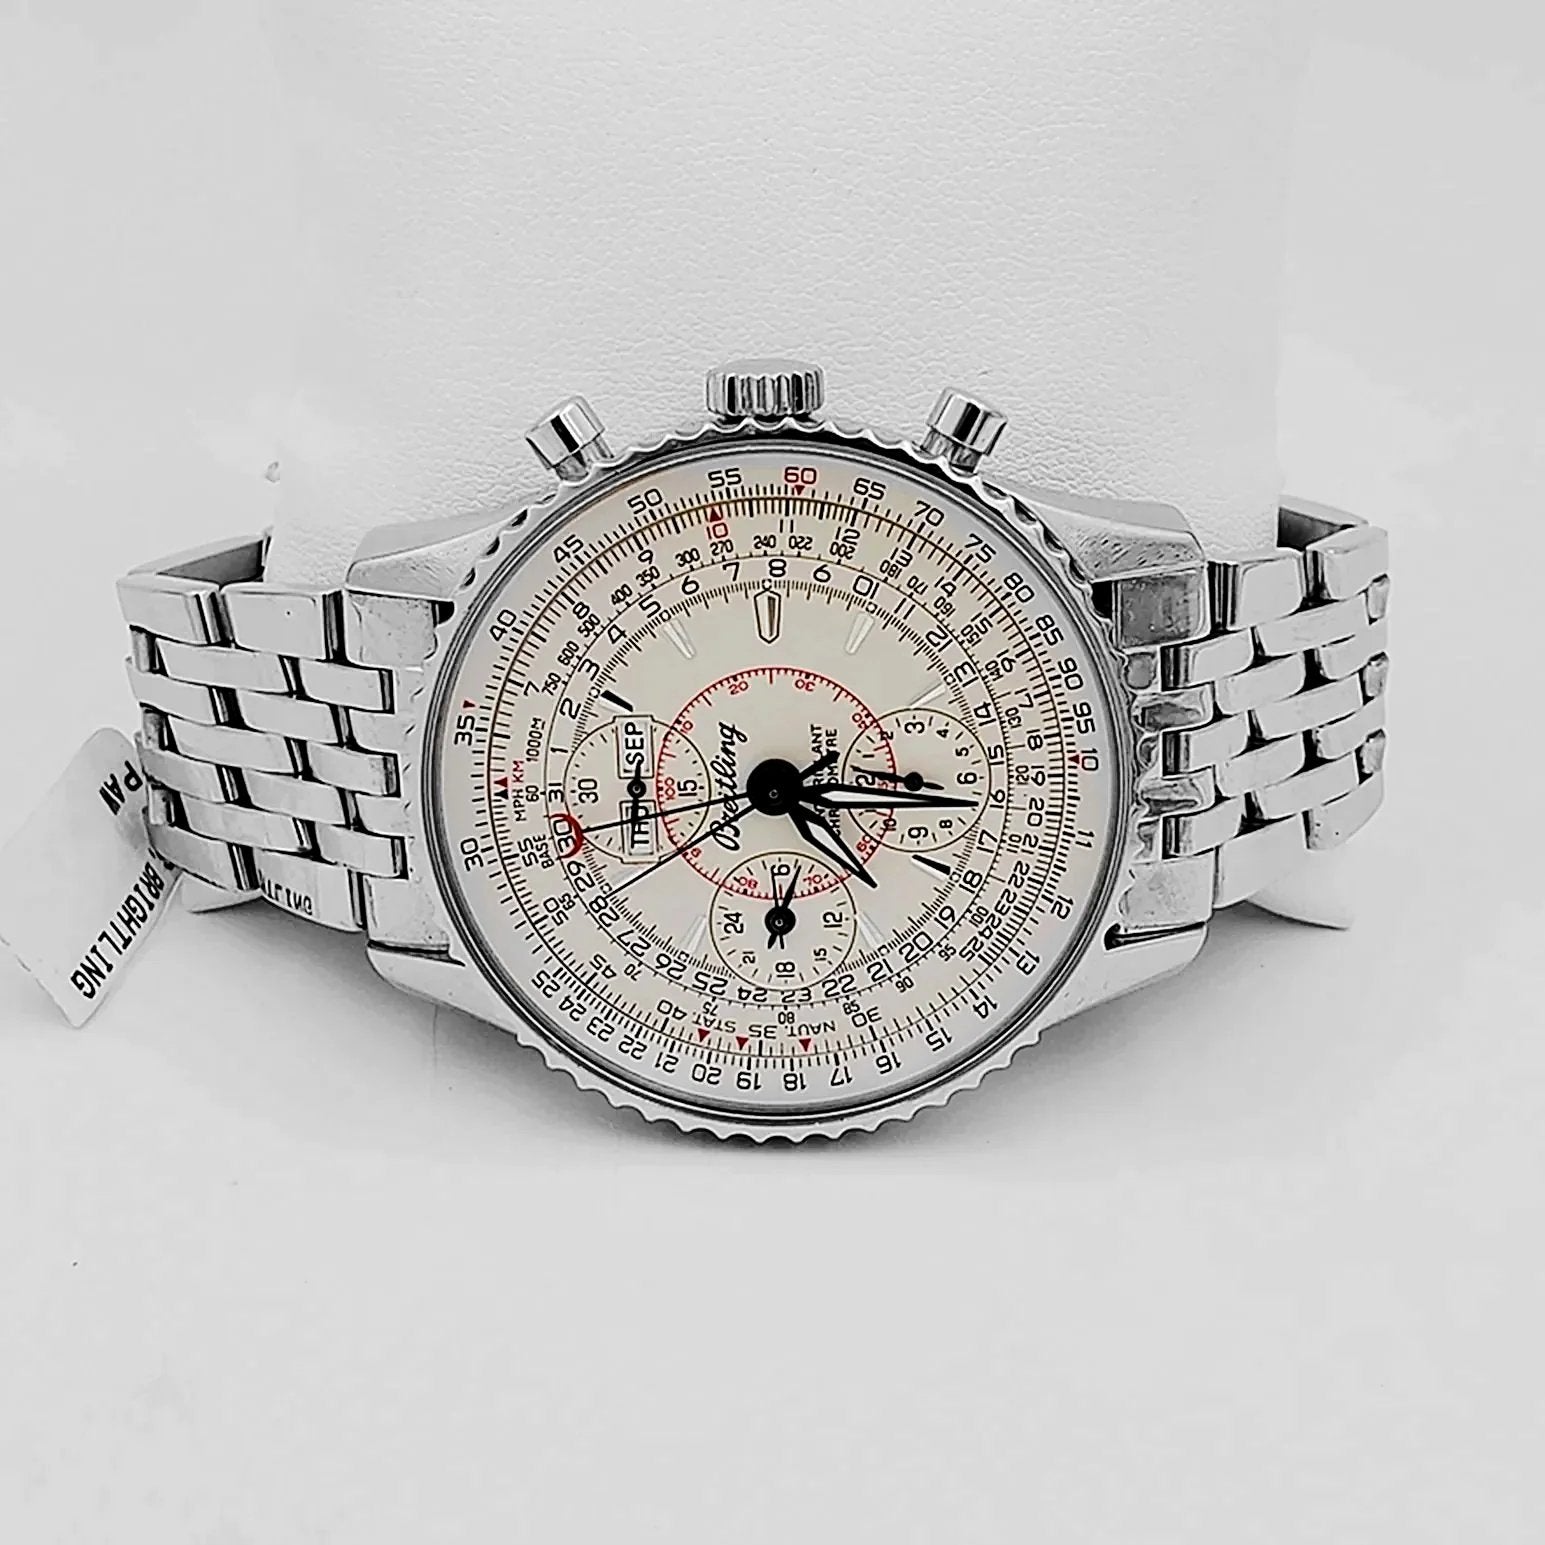 Men's Breitling A21330 Montbrillant 42mm Chronograph Stainless Steel Watch with White Dial. (Pre-Owned)